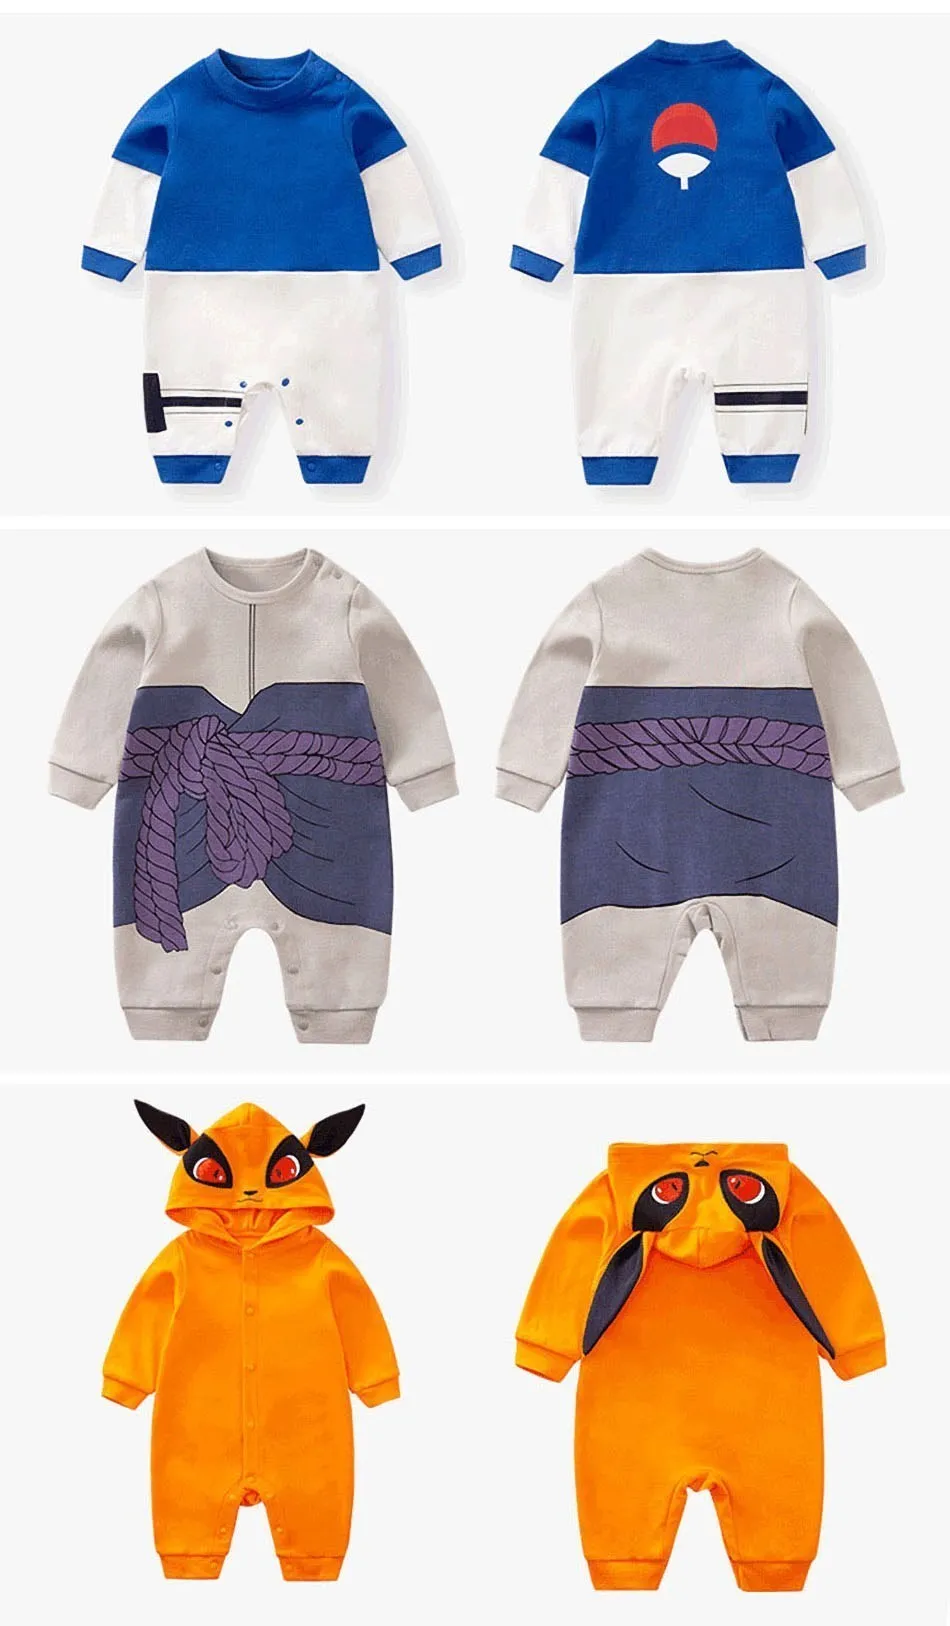 0-18 Months Anime Baby Rompers Newborn Cosplay Costume Infant Akatsuki Nezuko Tanjirou Cotton Clothes Boys Girls Kids Outfit